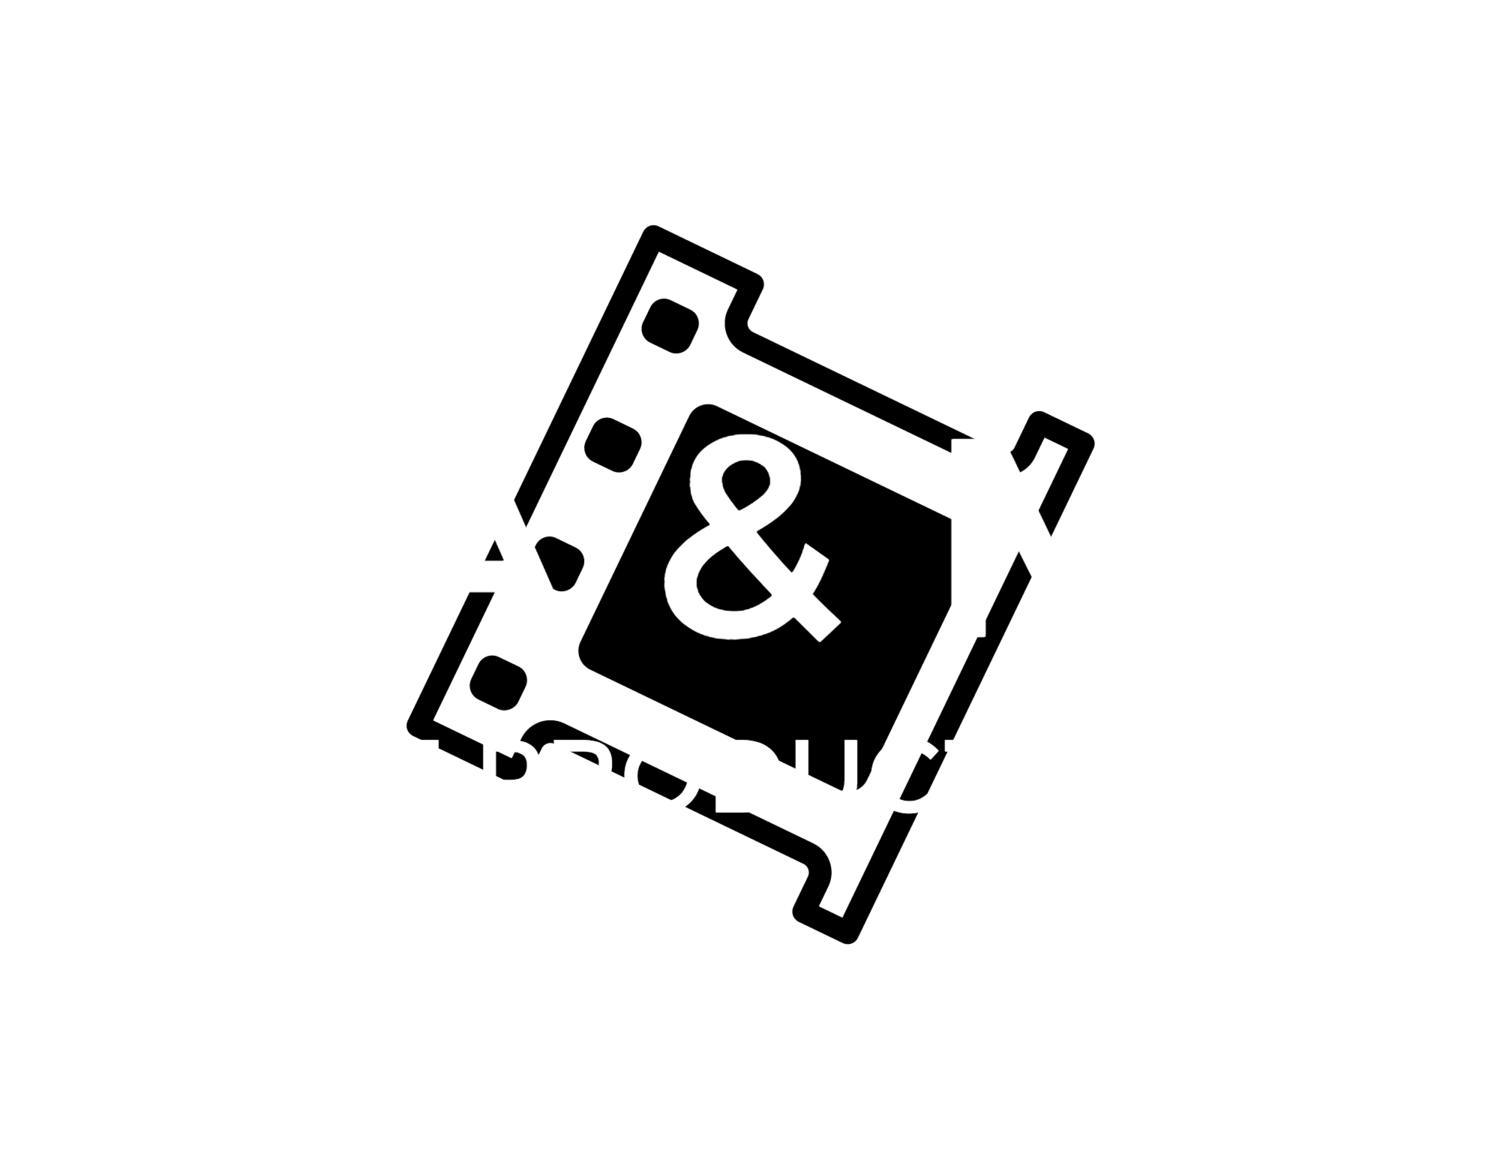 A & M Life Productions